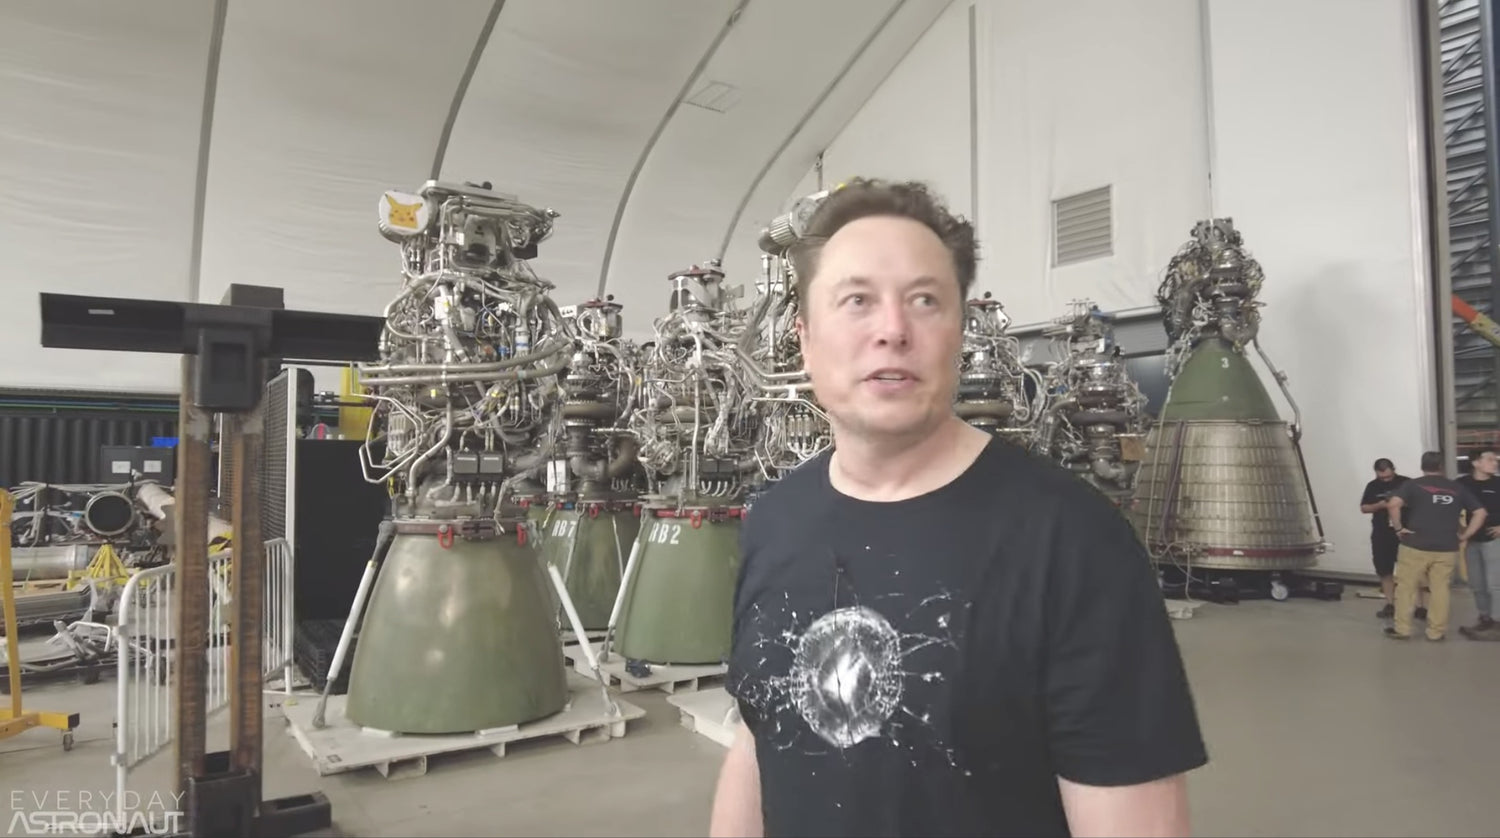 Everyday Astronaut Releases Second Video Of SpaceX Starbase Facility Tour With Elon Musk